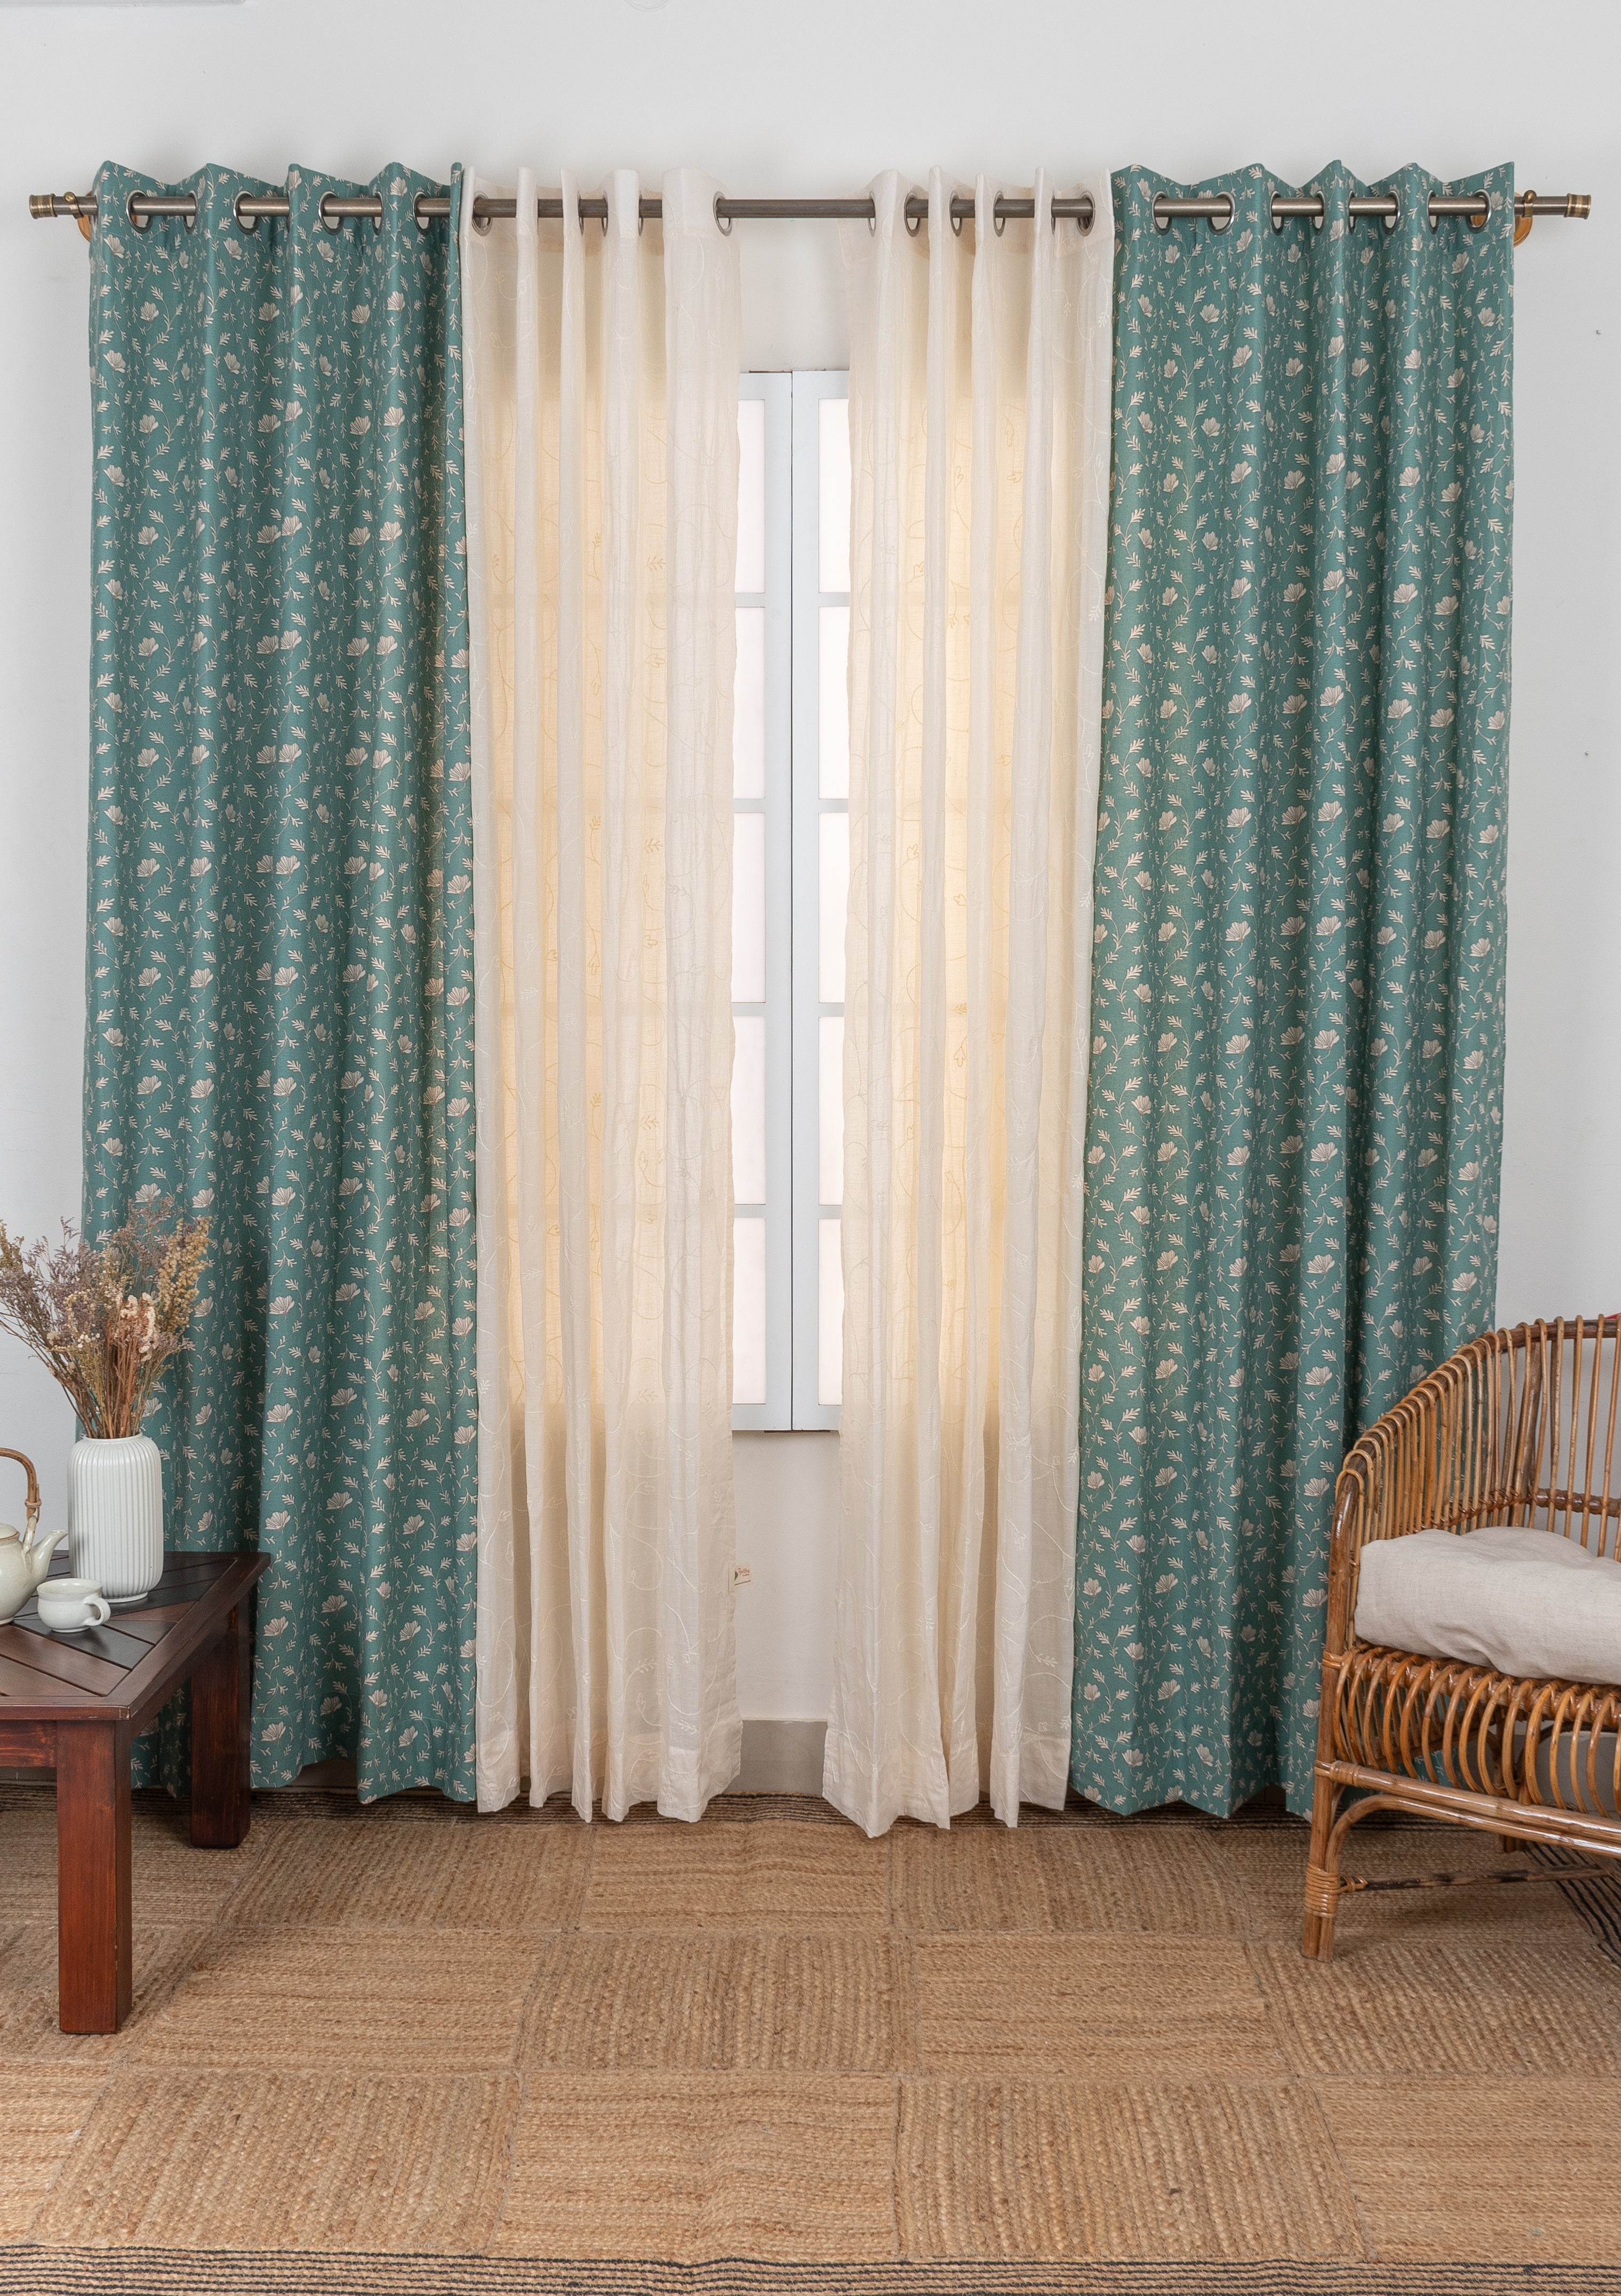 Eden floral cotton curtain Aqua blue with Ivy vines embroidered cream 100% cotton curtains for living room - Set of 4